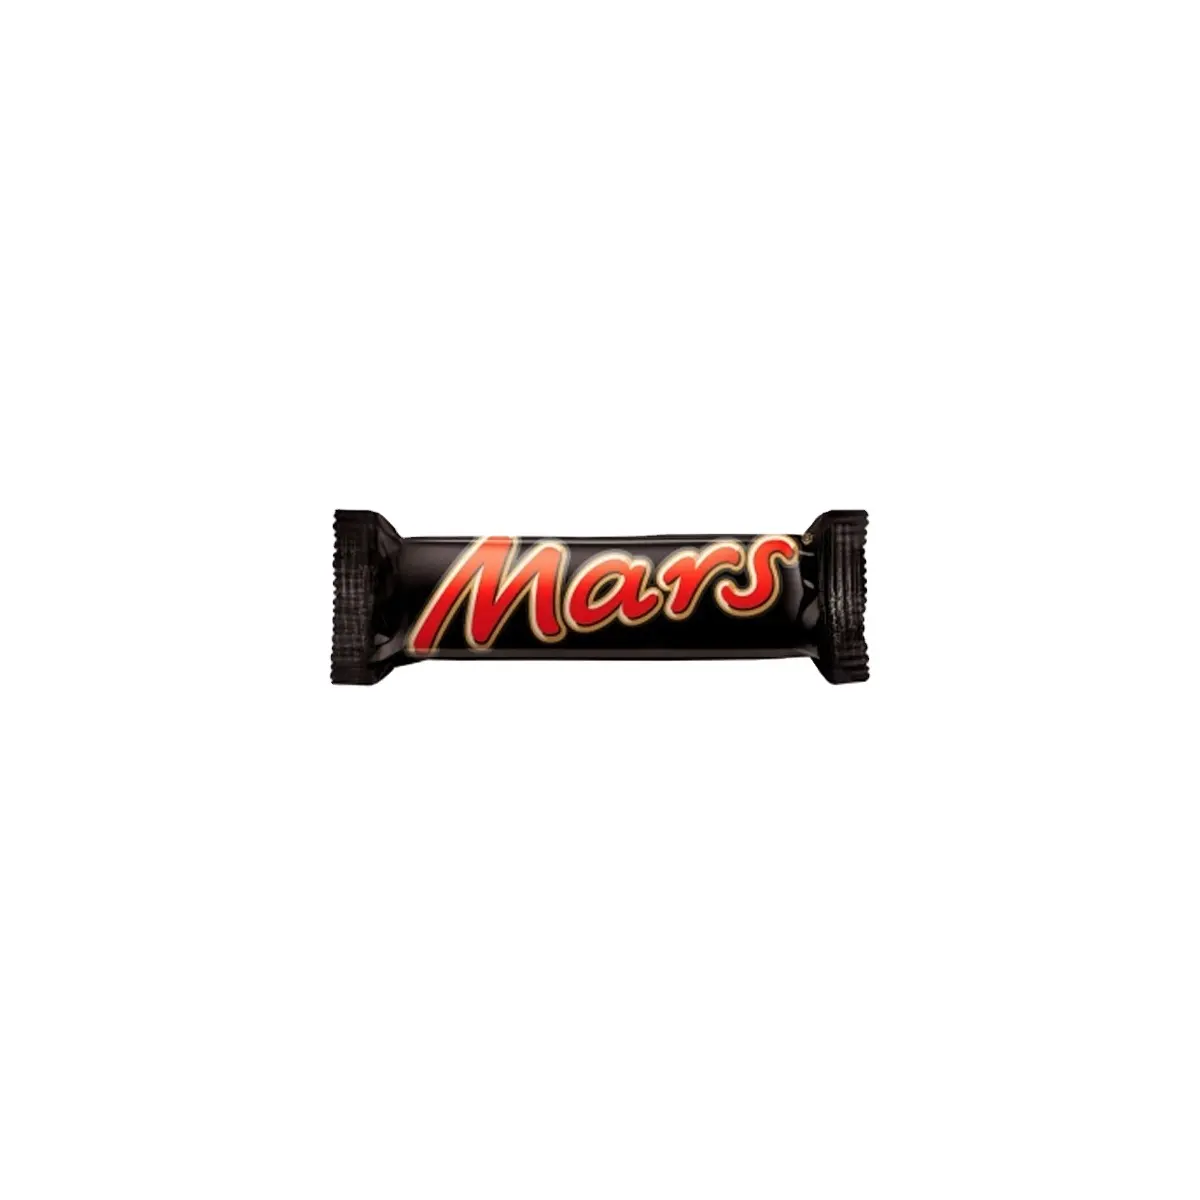 Mars Chocolate bar 51g for sale /Top quality Mars chocolate bar 70gX24 packing per Case Offer Free sample